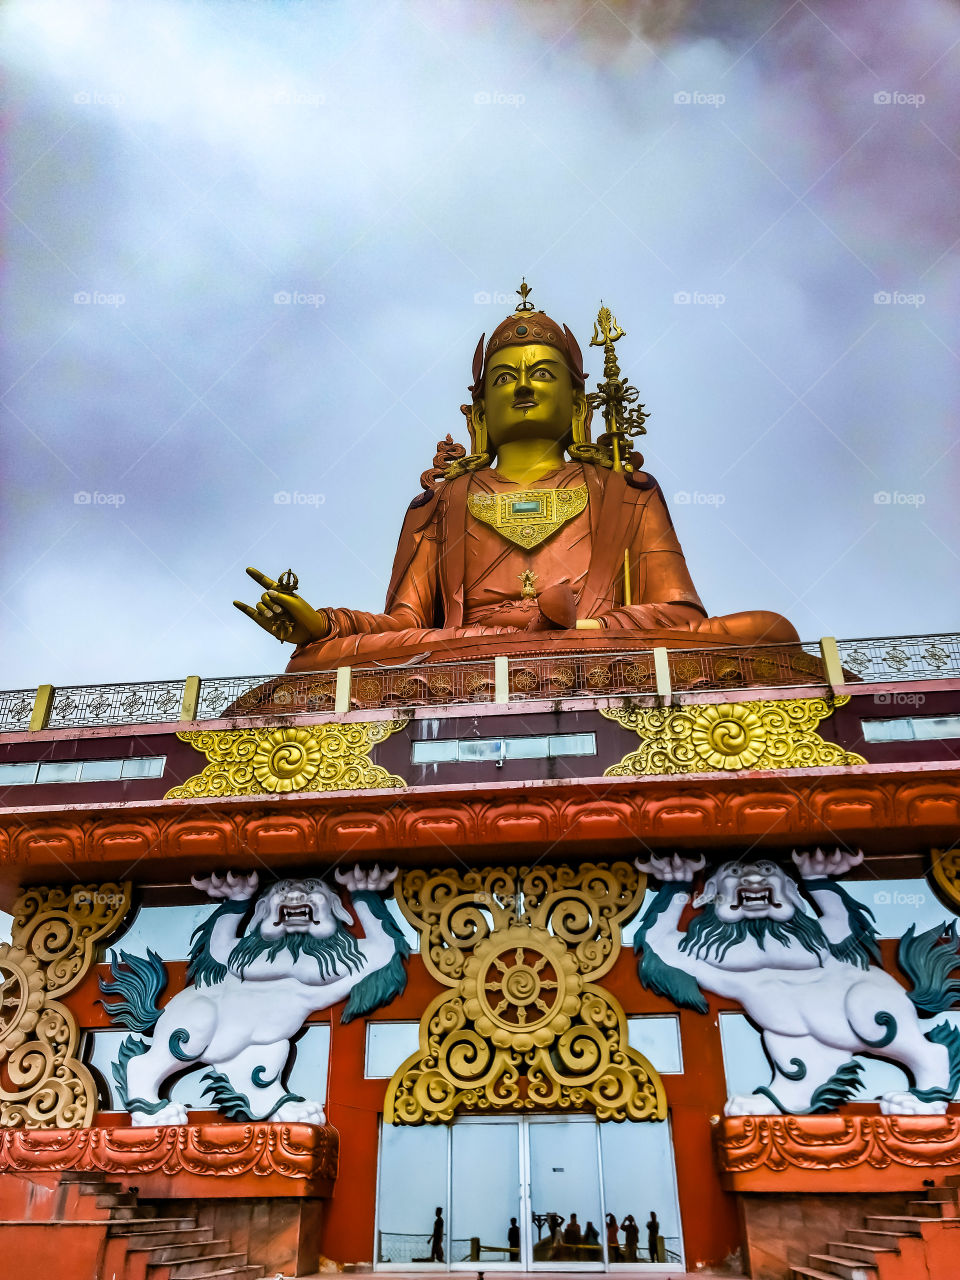 Samdruptse Hill; the 'wish fulfilling hill' is just 5 km away from Namchi, situated at an altitude of 2134 m (7000 ft). This epic hill is ornamented with a giant statue of the Guru Padmasambhava (Guru Rinpoche); the patron saint of Sikkim who has been showering its blessings since more than 1,200 years. It is a 45 m tall statue, overlooking the whole city, and is gilded with gold that glitters when the sunlight falls over it. The hill offers the vista of the magnificent Mt. Kangchenjunga amongst the richly forested hills under the blue painted sky. It is believed that the hill is a dormant volcano and only prayers can hold it from erupting, that is why the local monks offer their reverence and devotion to it